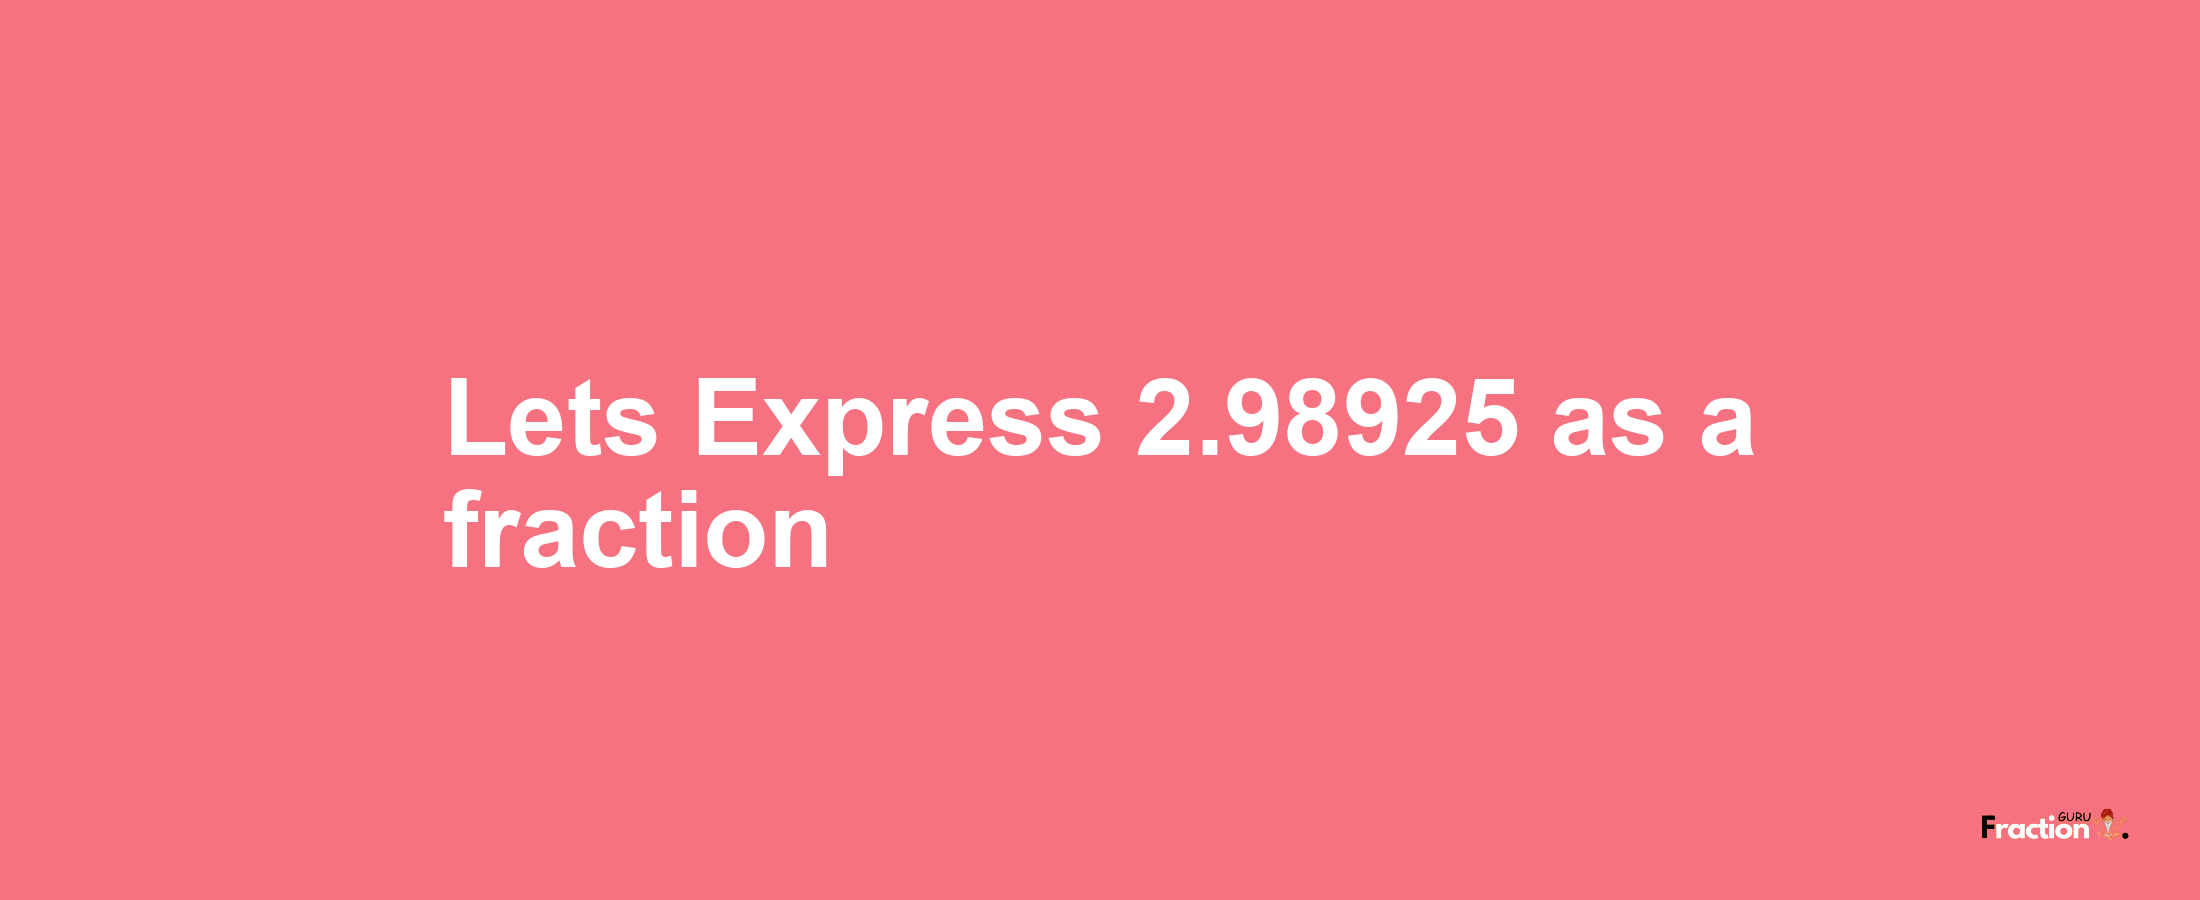 Lets Express 2.98925 as afraction